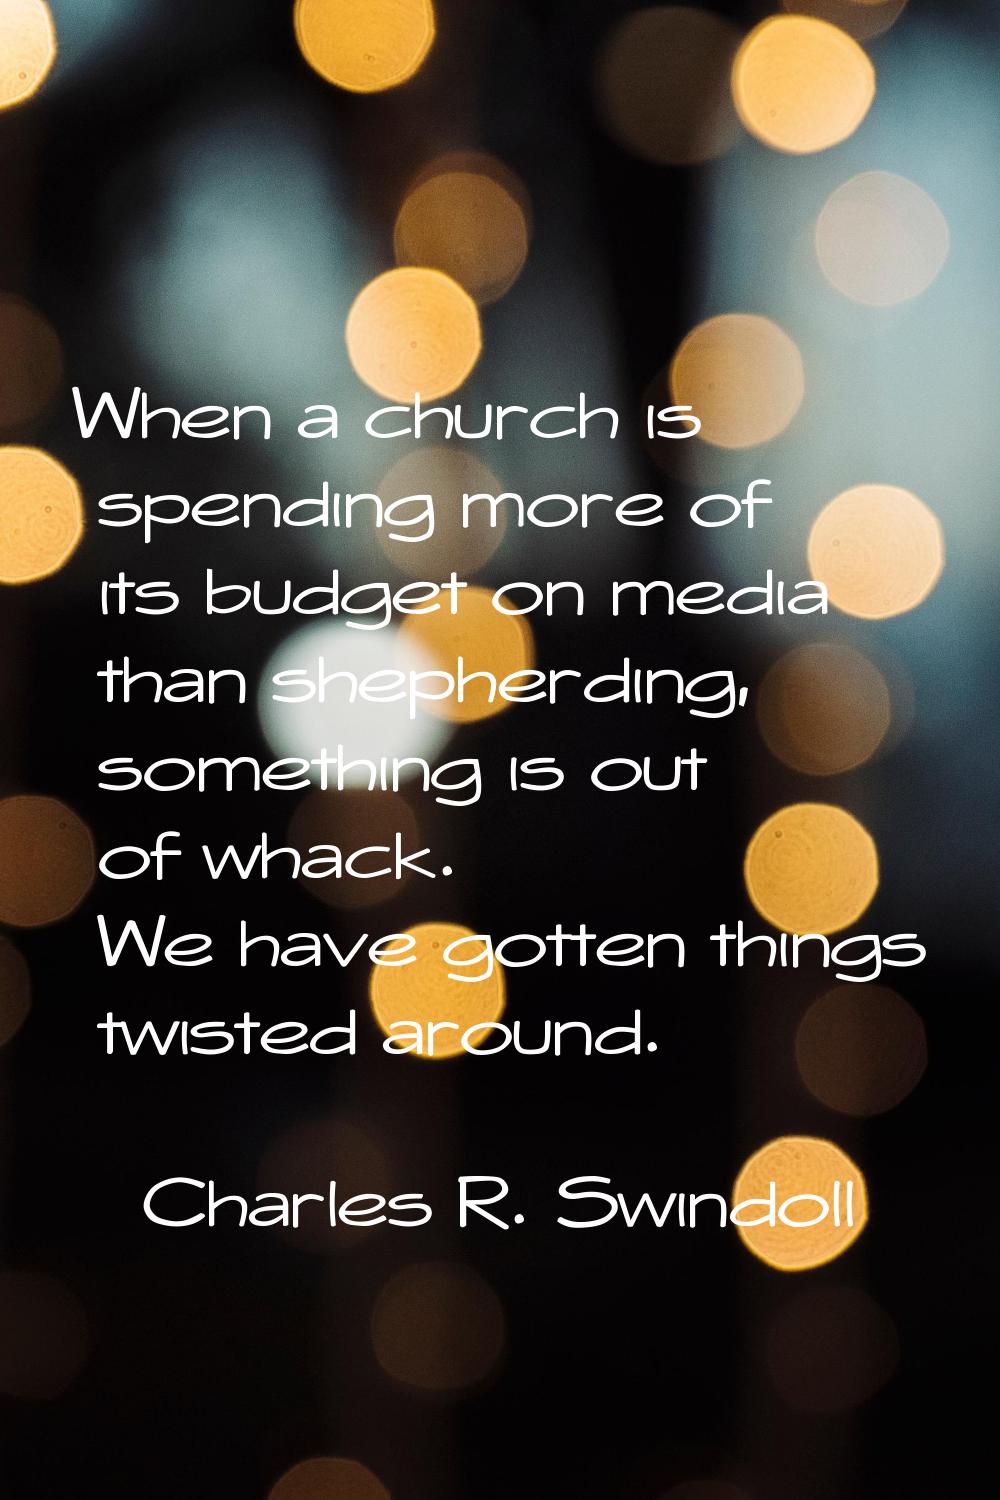 When a church is spending more of its budget on media than shepherding, something is out of whack. 